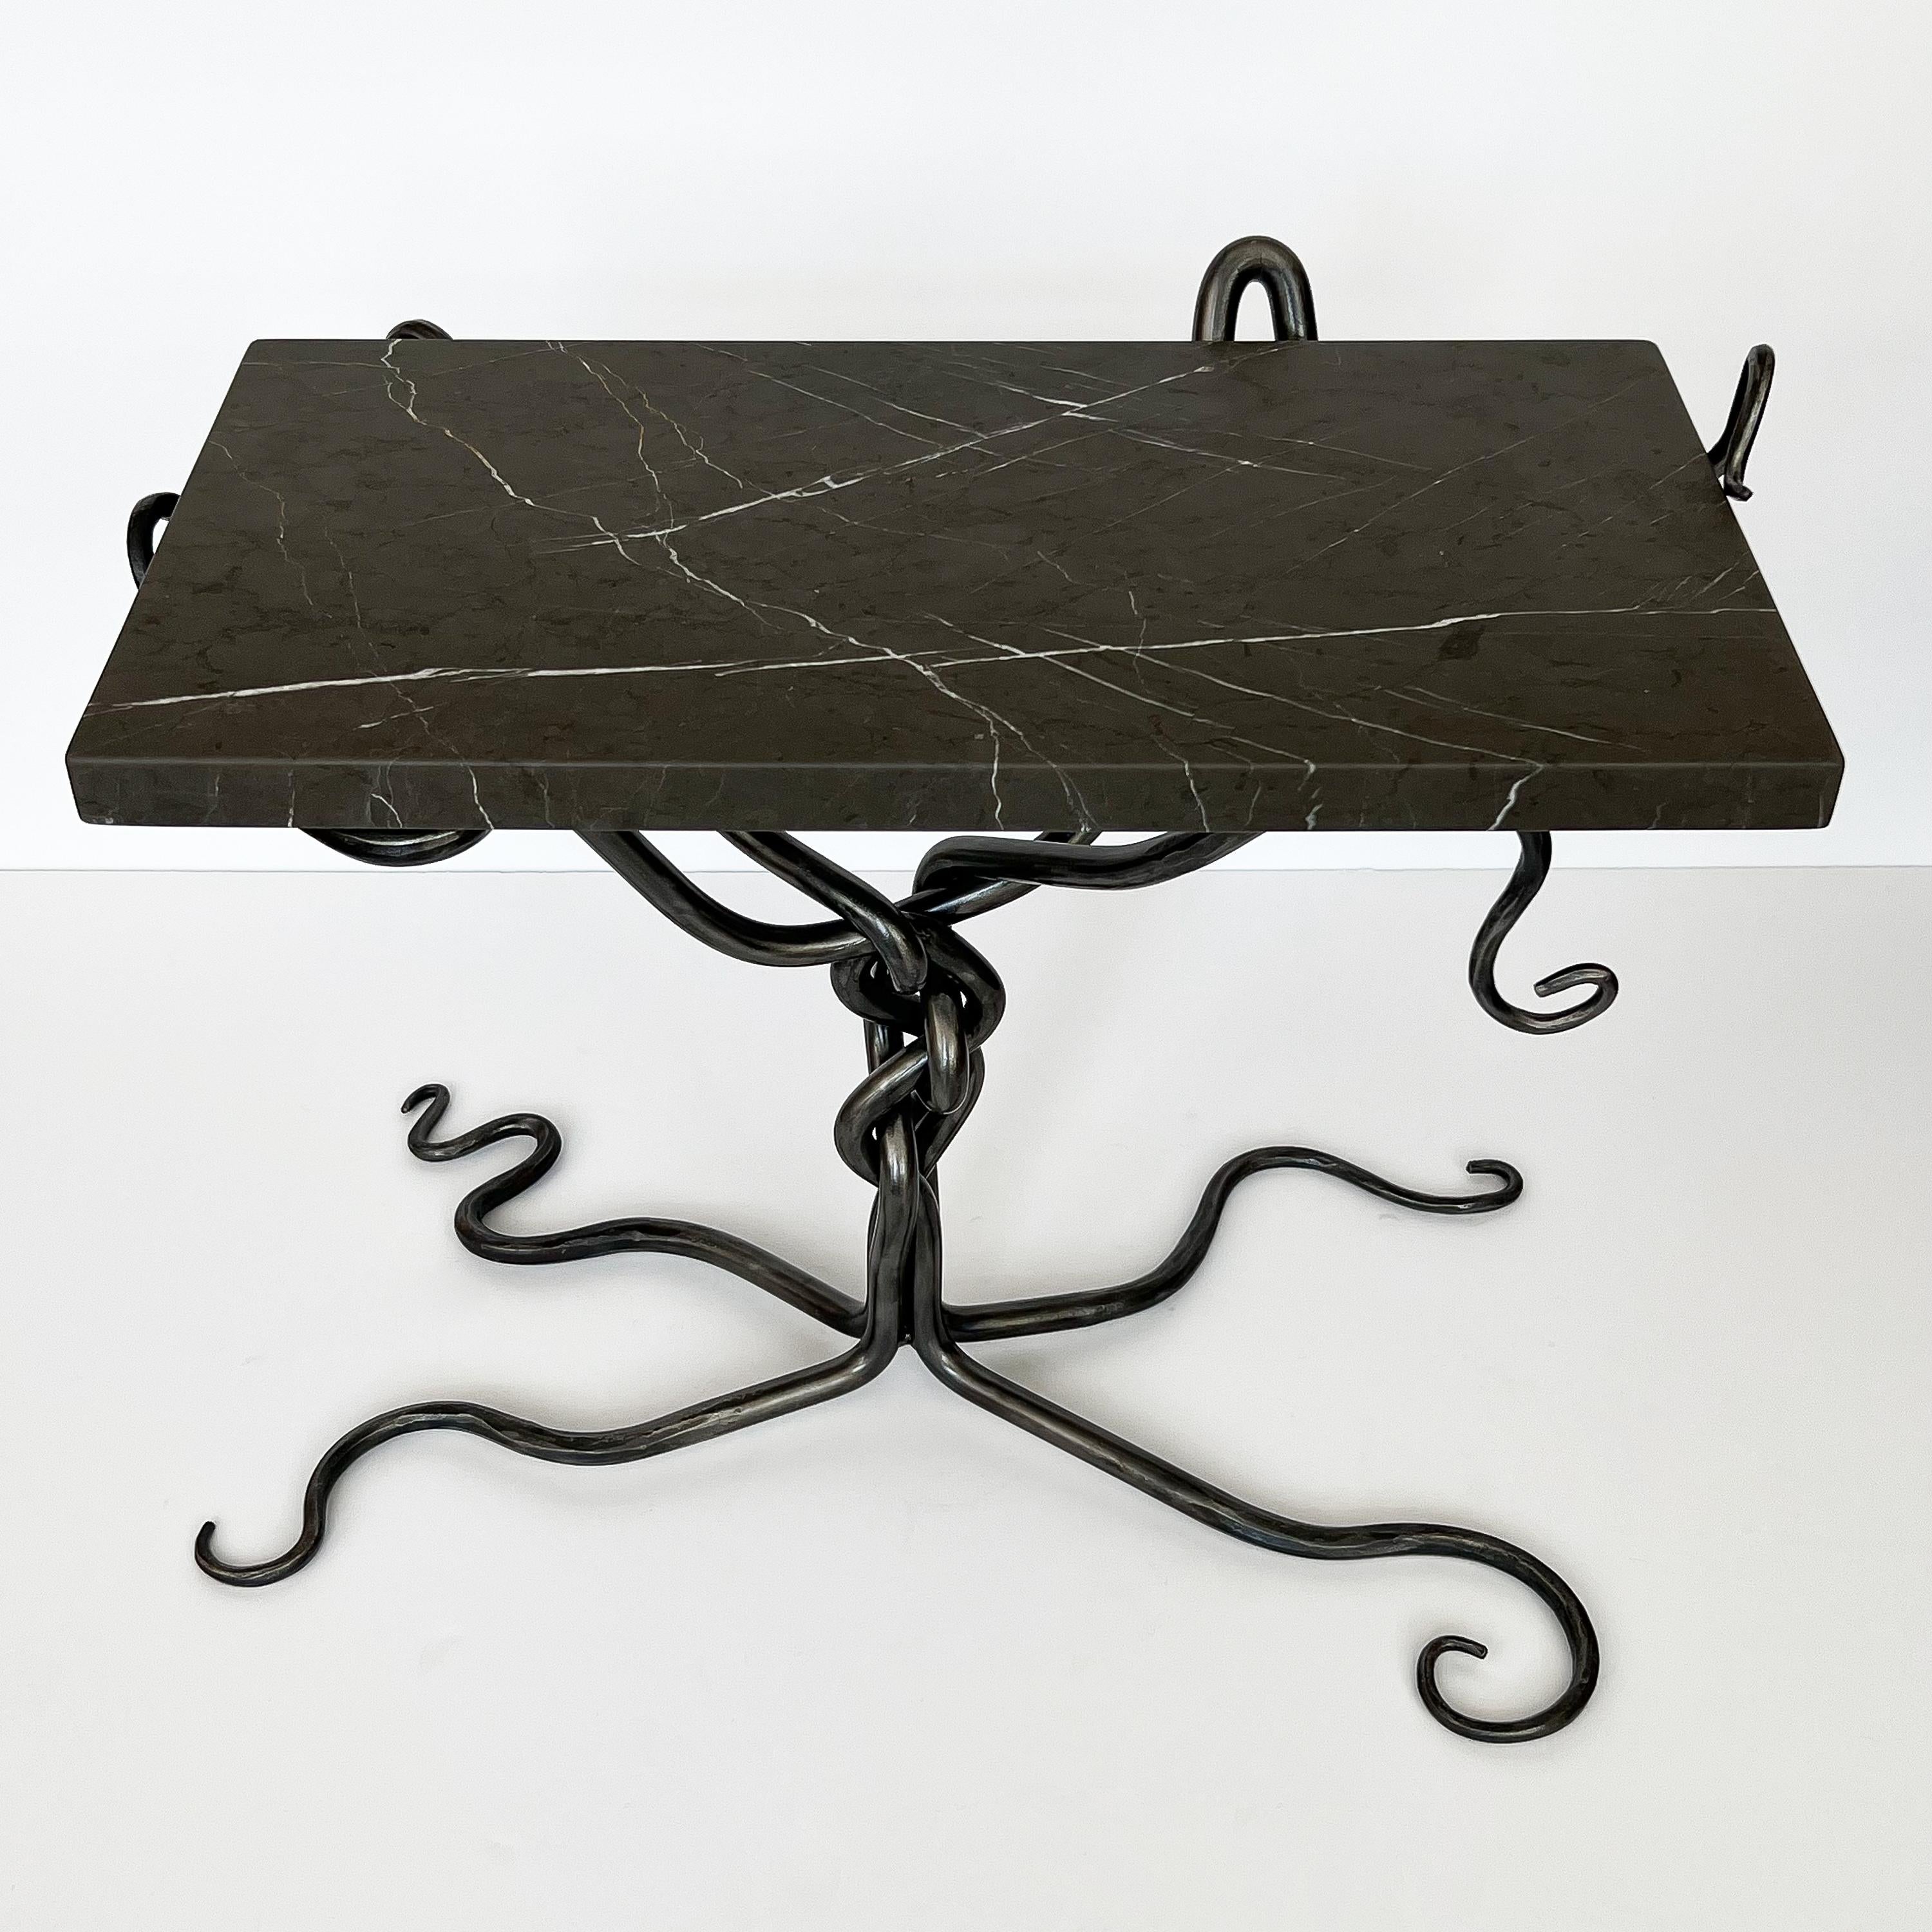 A spectacular hand-forged steel end or side table with marble top, circa late 20th century. Unmarked and unknown artist. Four separate forged steel bars are interwoven creating a central twisted knot, four splayed snaking legs and supports for the